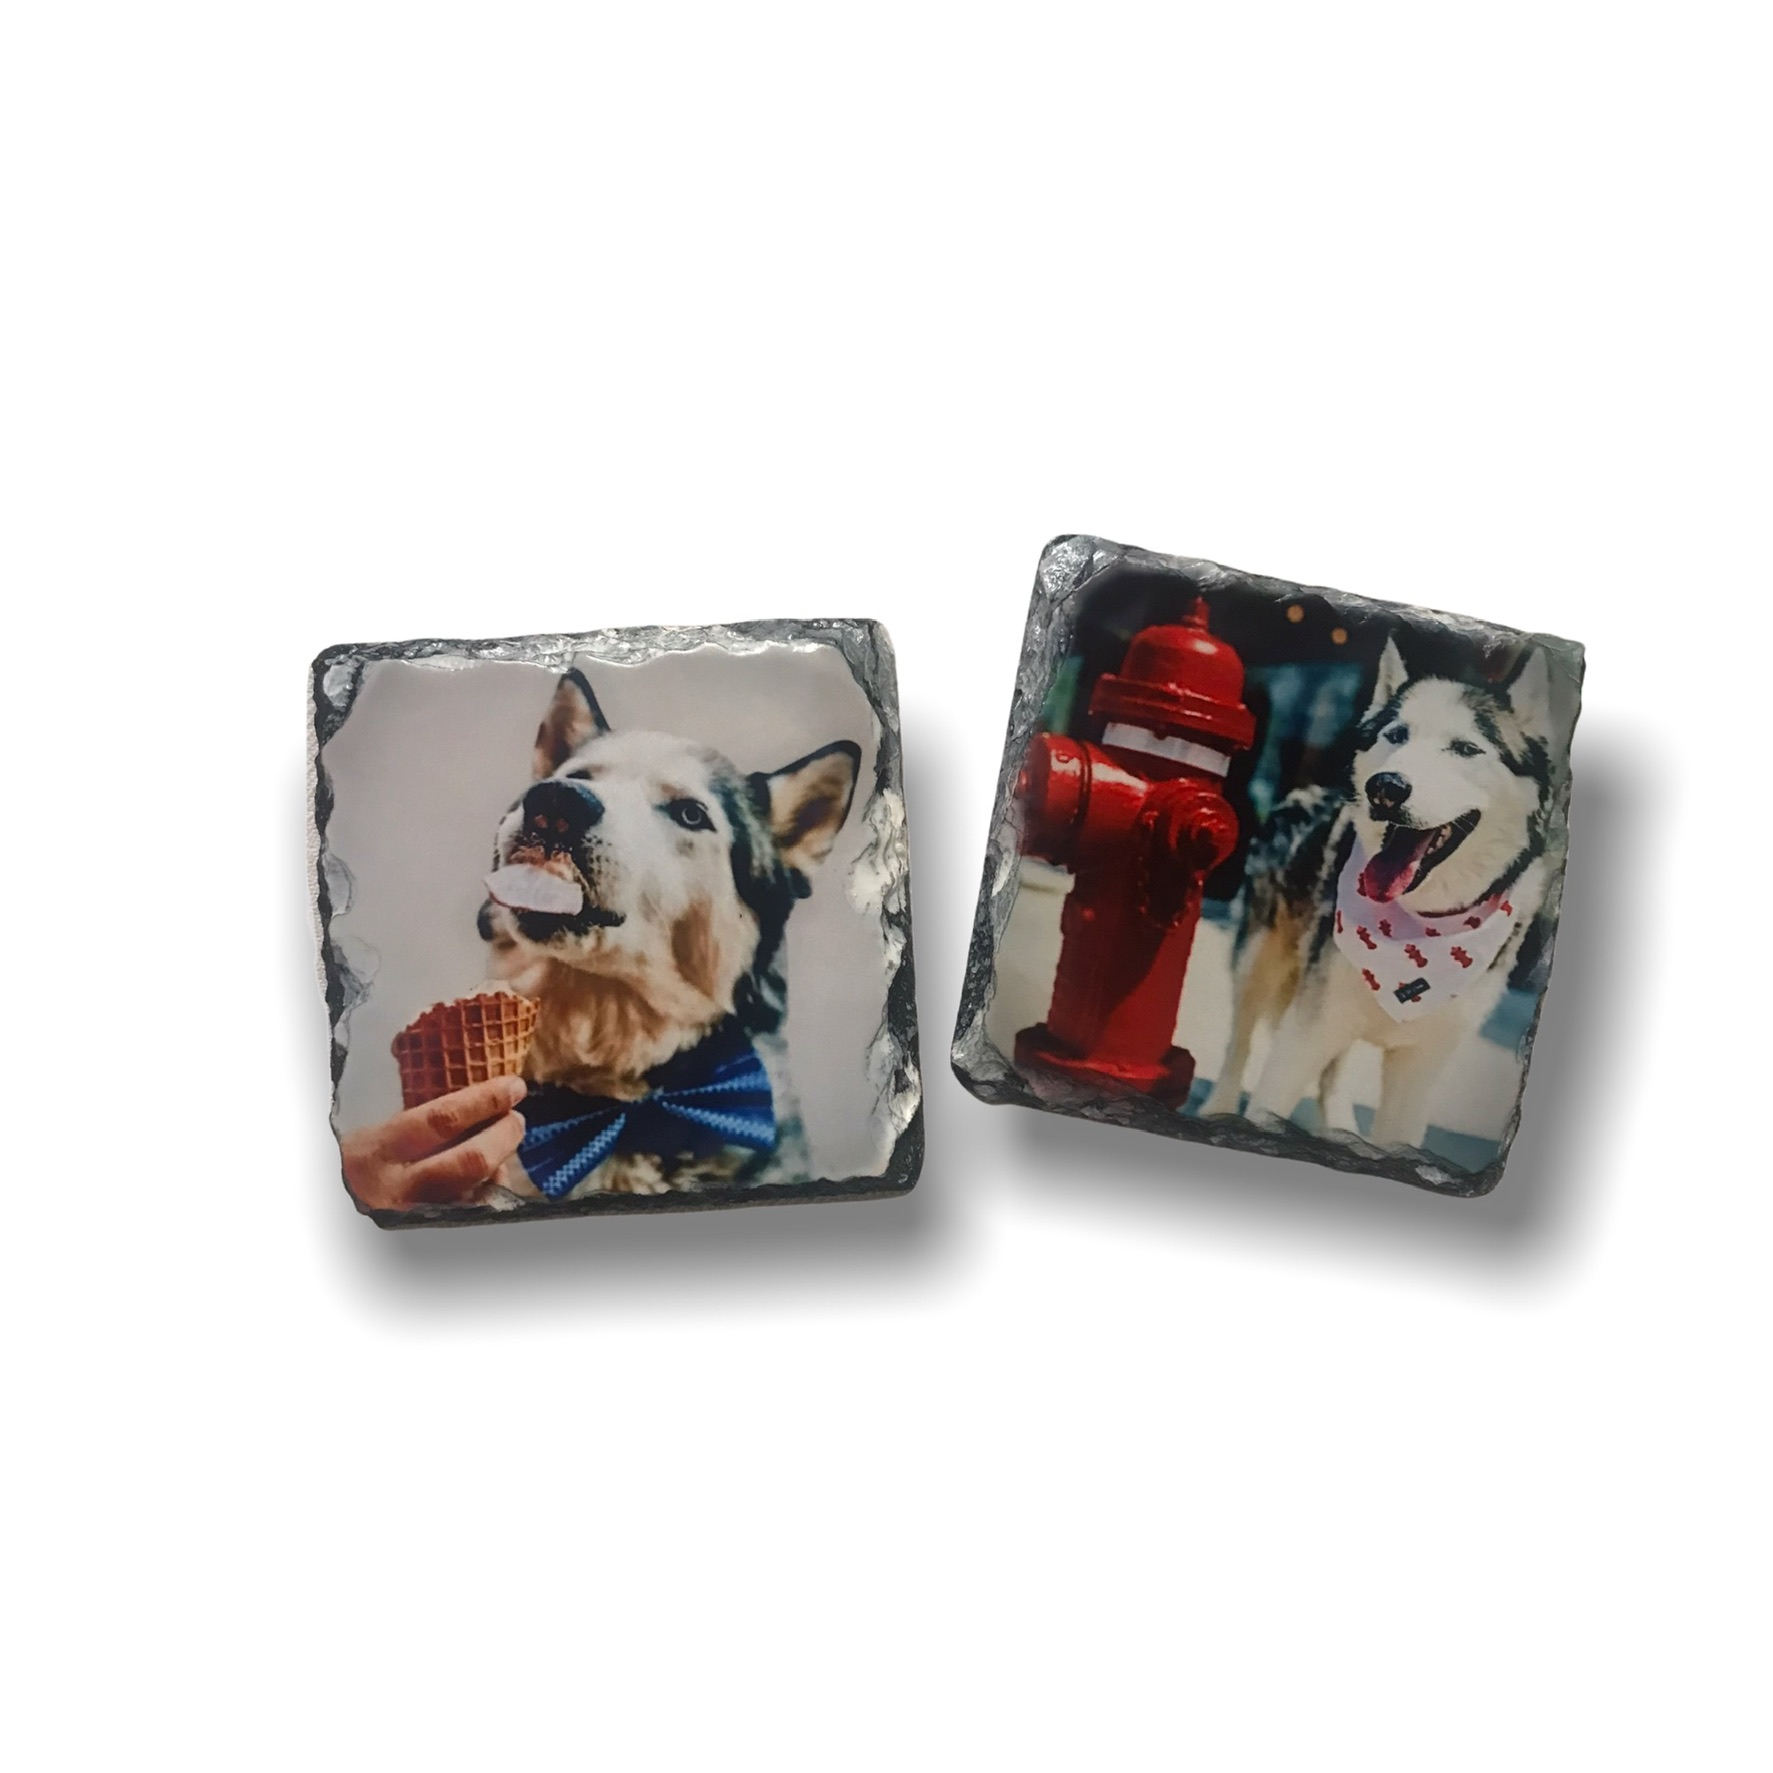 Remembering manâ€™s best friend made with sublimation printing